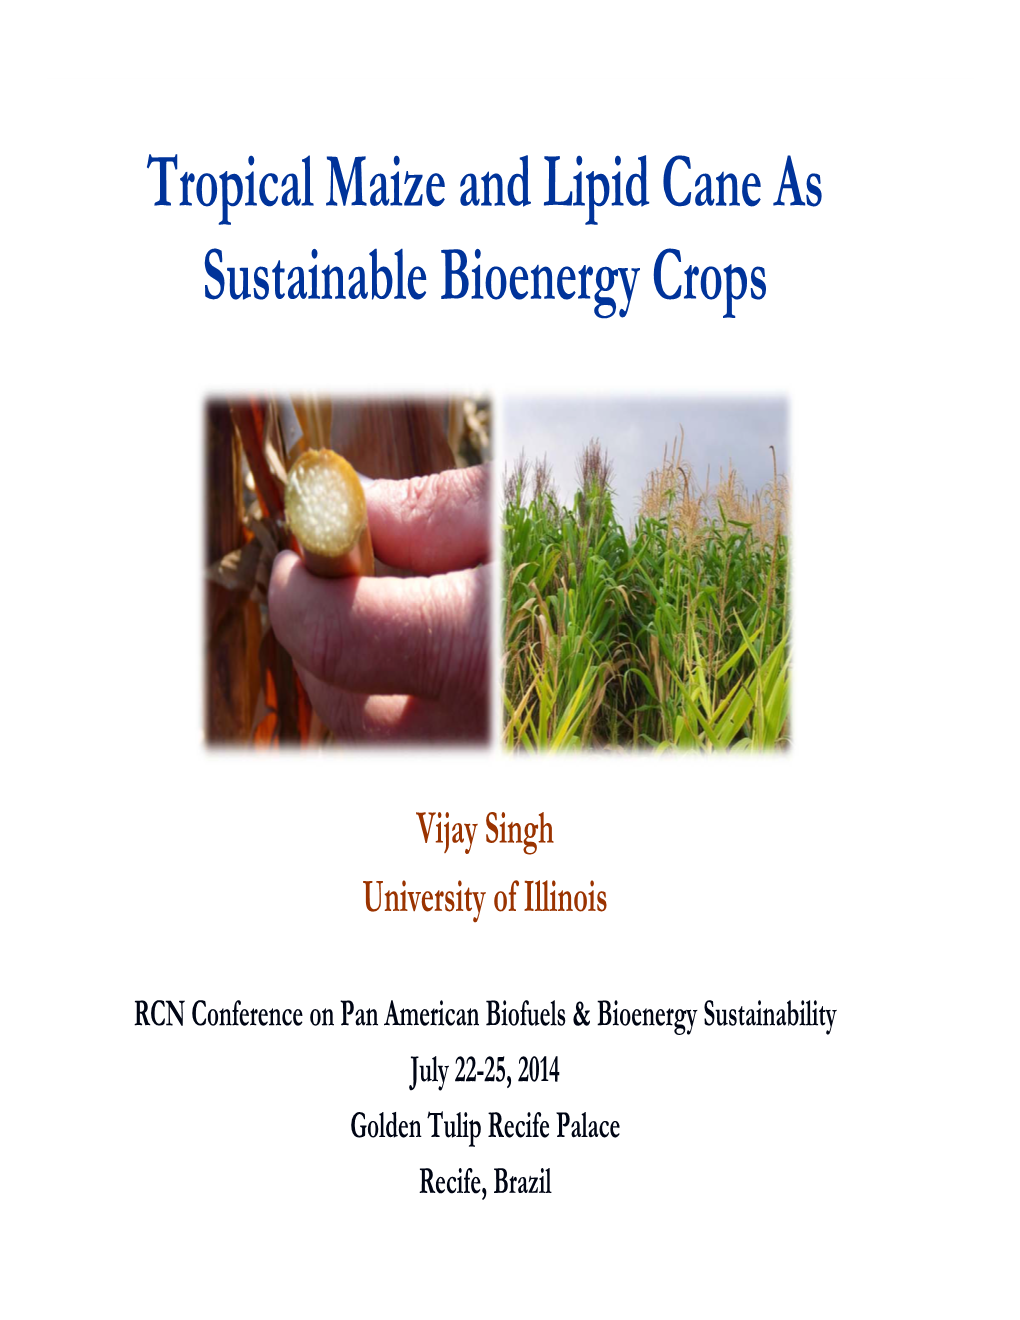 Tropical Maize and Lipid Cane As Sustainable Bioenergy Crops